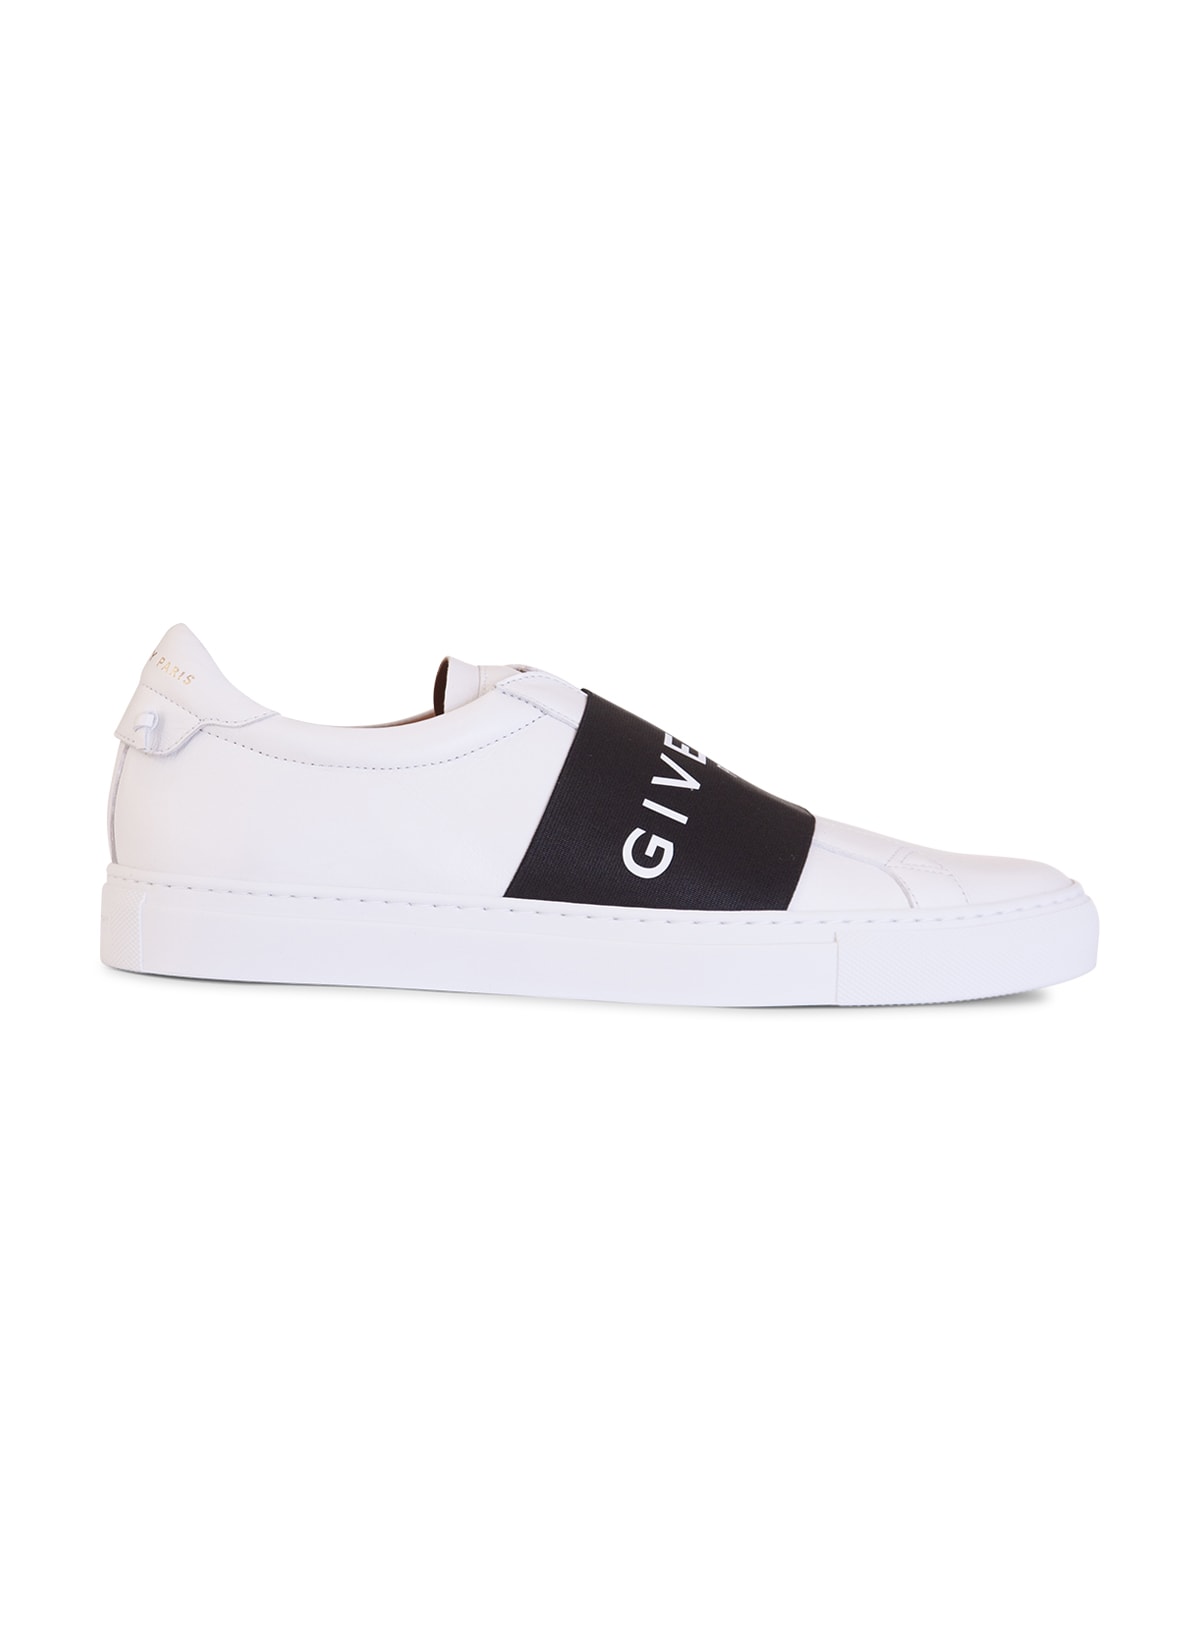 Givenchy Urban Street Slip-on Sneakers